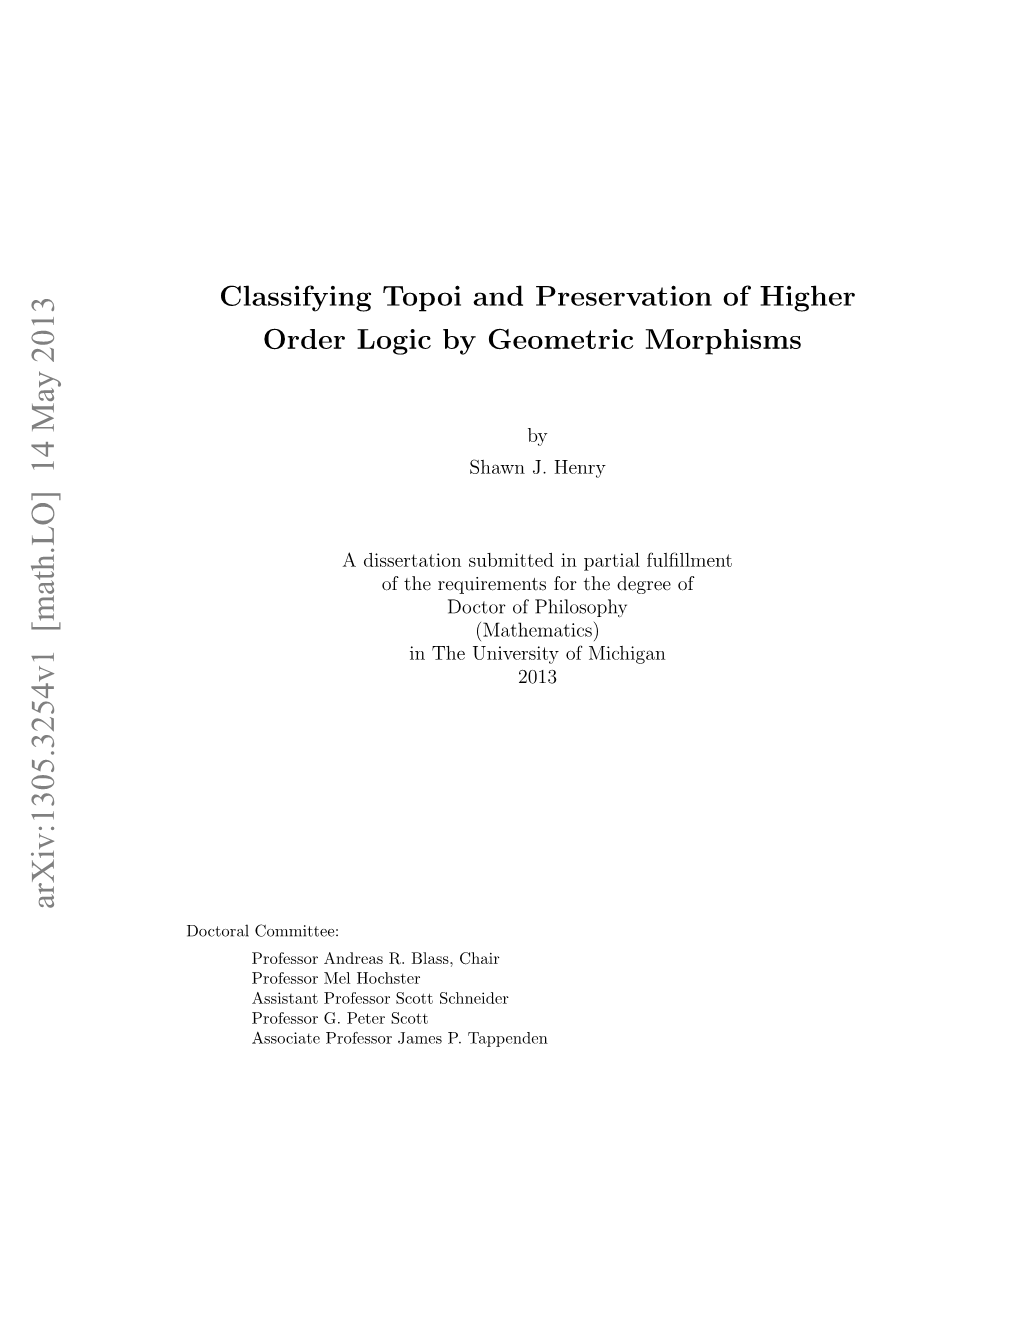 Classifying Topoi and Preservation of Higher Order Logic by Geometric